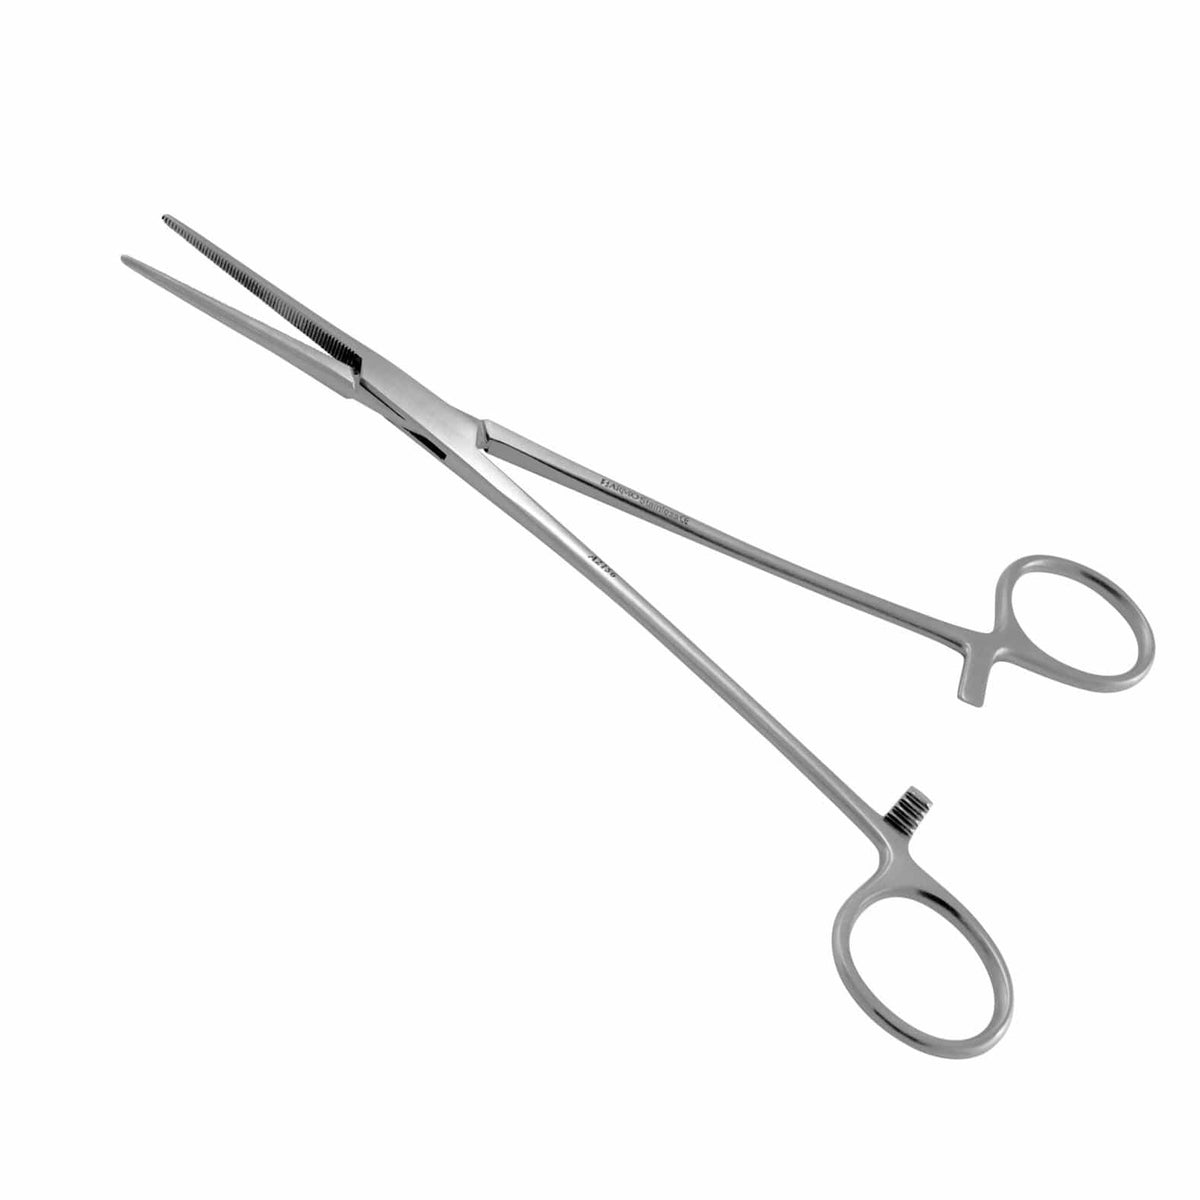 Armo Surgical Instruments Armo Heiss Artery Forceps